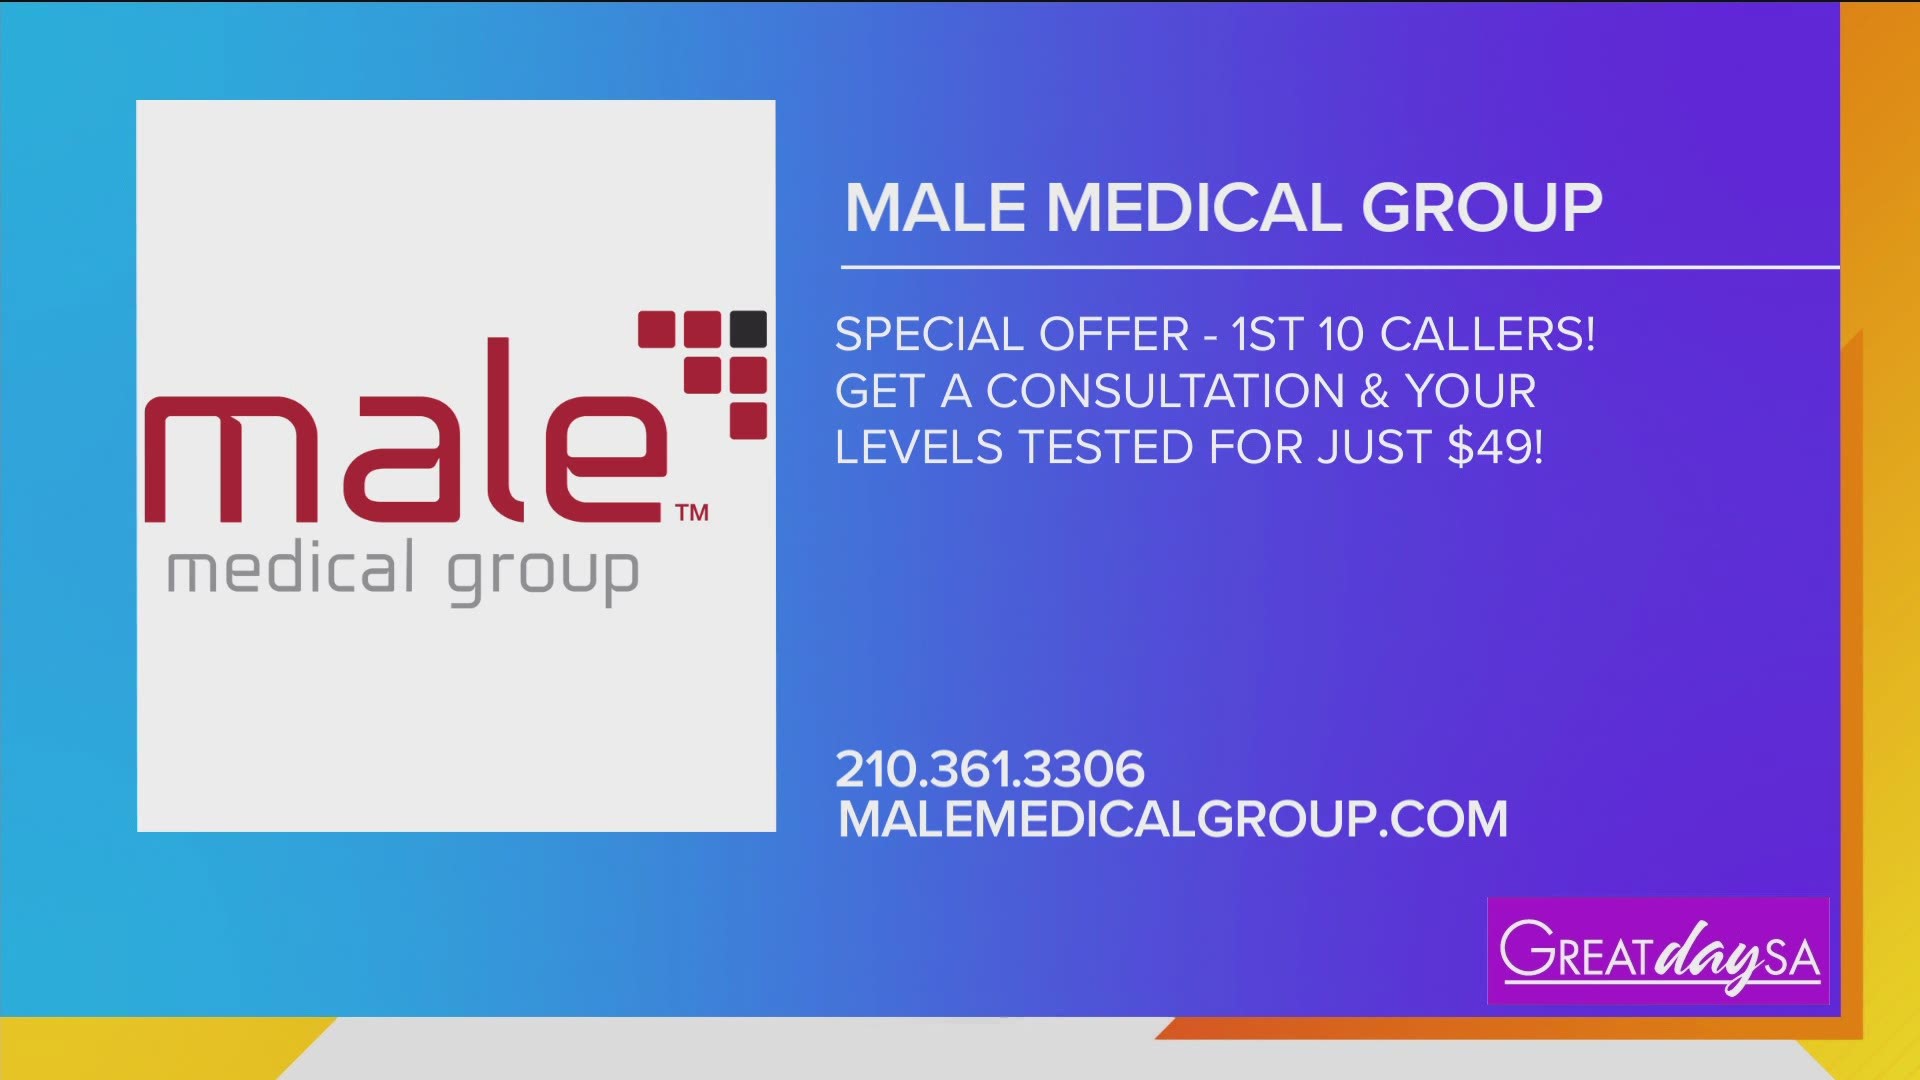 Male Medical Group can help you get your confidence back.